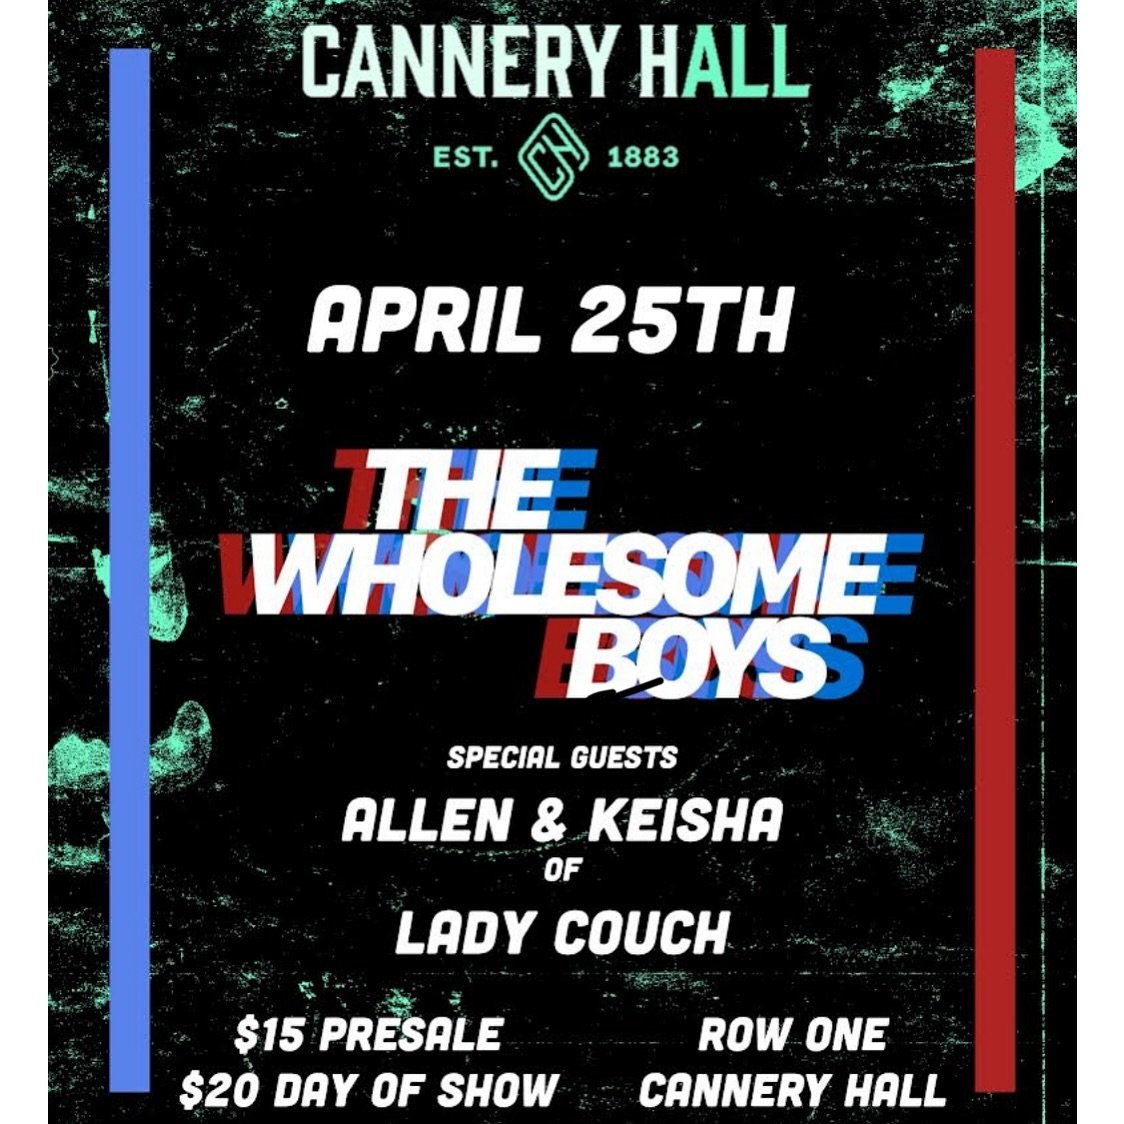 This Thursday 4/25 @allen_thompson and @keshiabaileymusic will be performing a special duo acoustic set at @canneryhallnashville with our good friends @the.wholesomeboys!!!! 

Come on out and say hey! 

Tickets available at Cannery Hall&rsquo;s websi